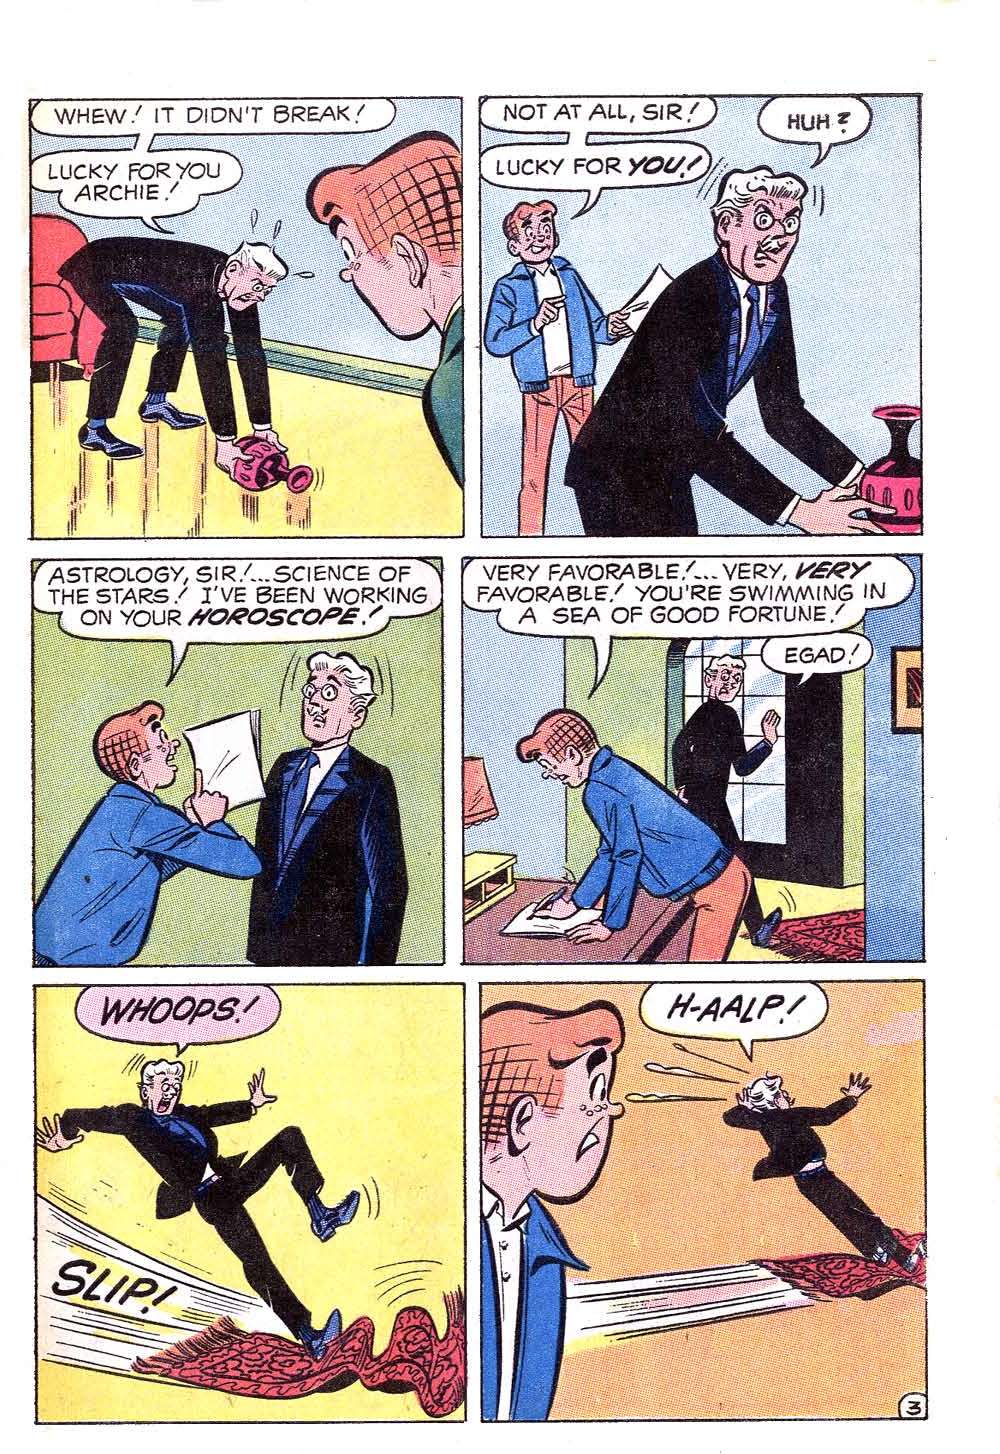 Archie (1960) 204 Page 5